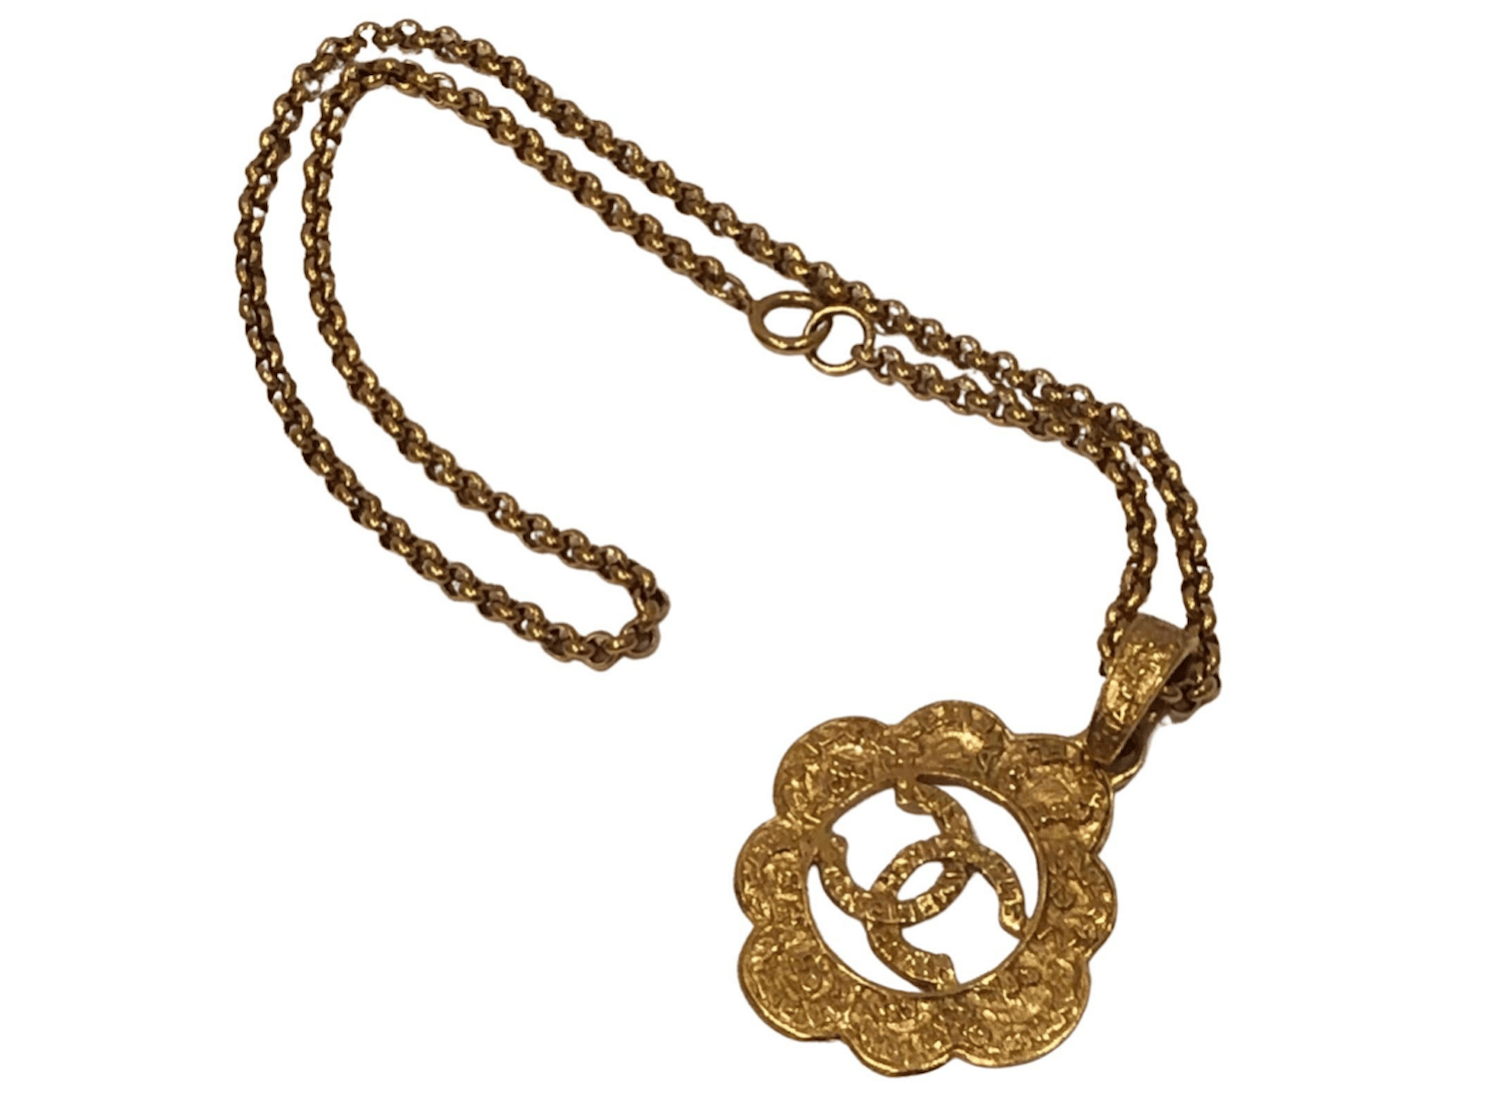 Pendant necklace  Metal  strass gold  crystal  Fashion  CHANEL